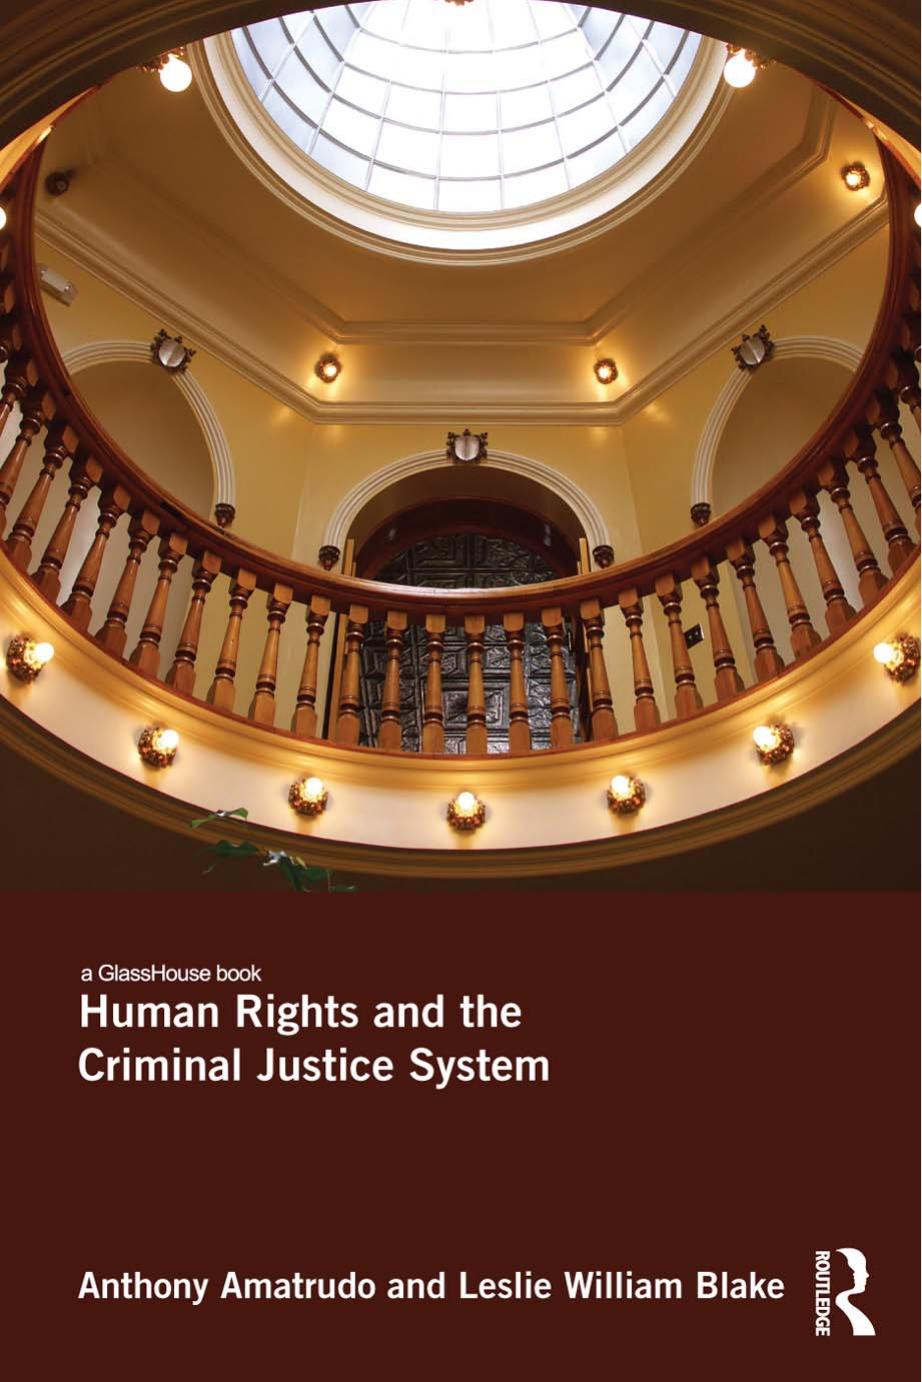 Human Rights and the Criminal Justice System by Anthony Amatrudo & Leslie William Blake